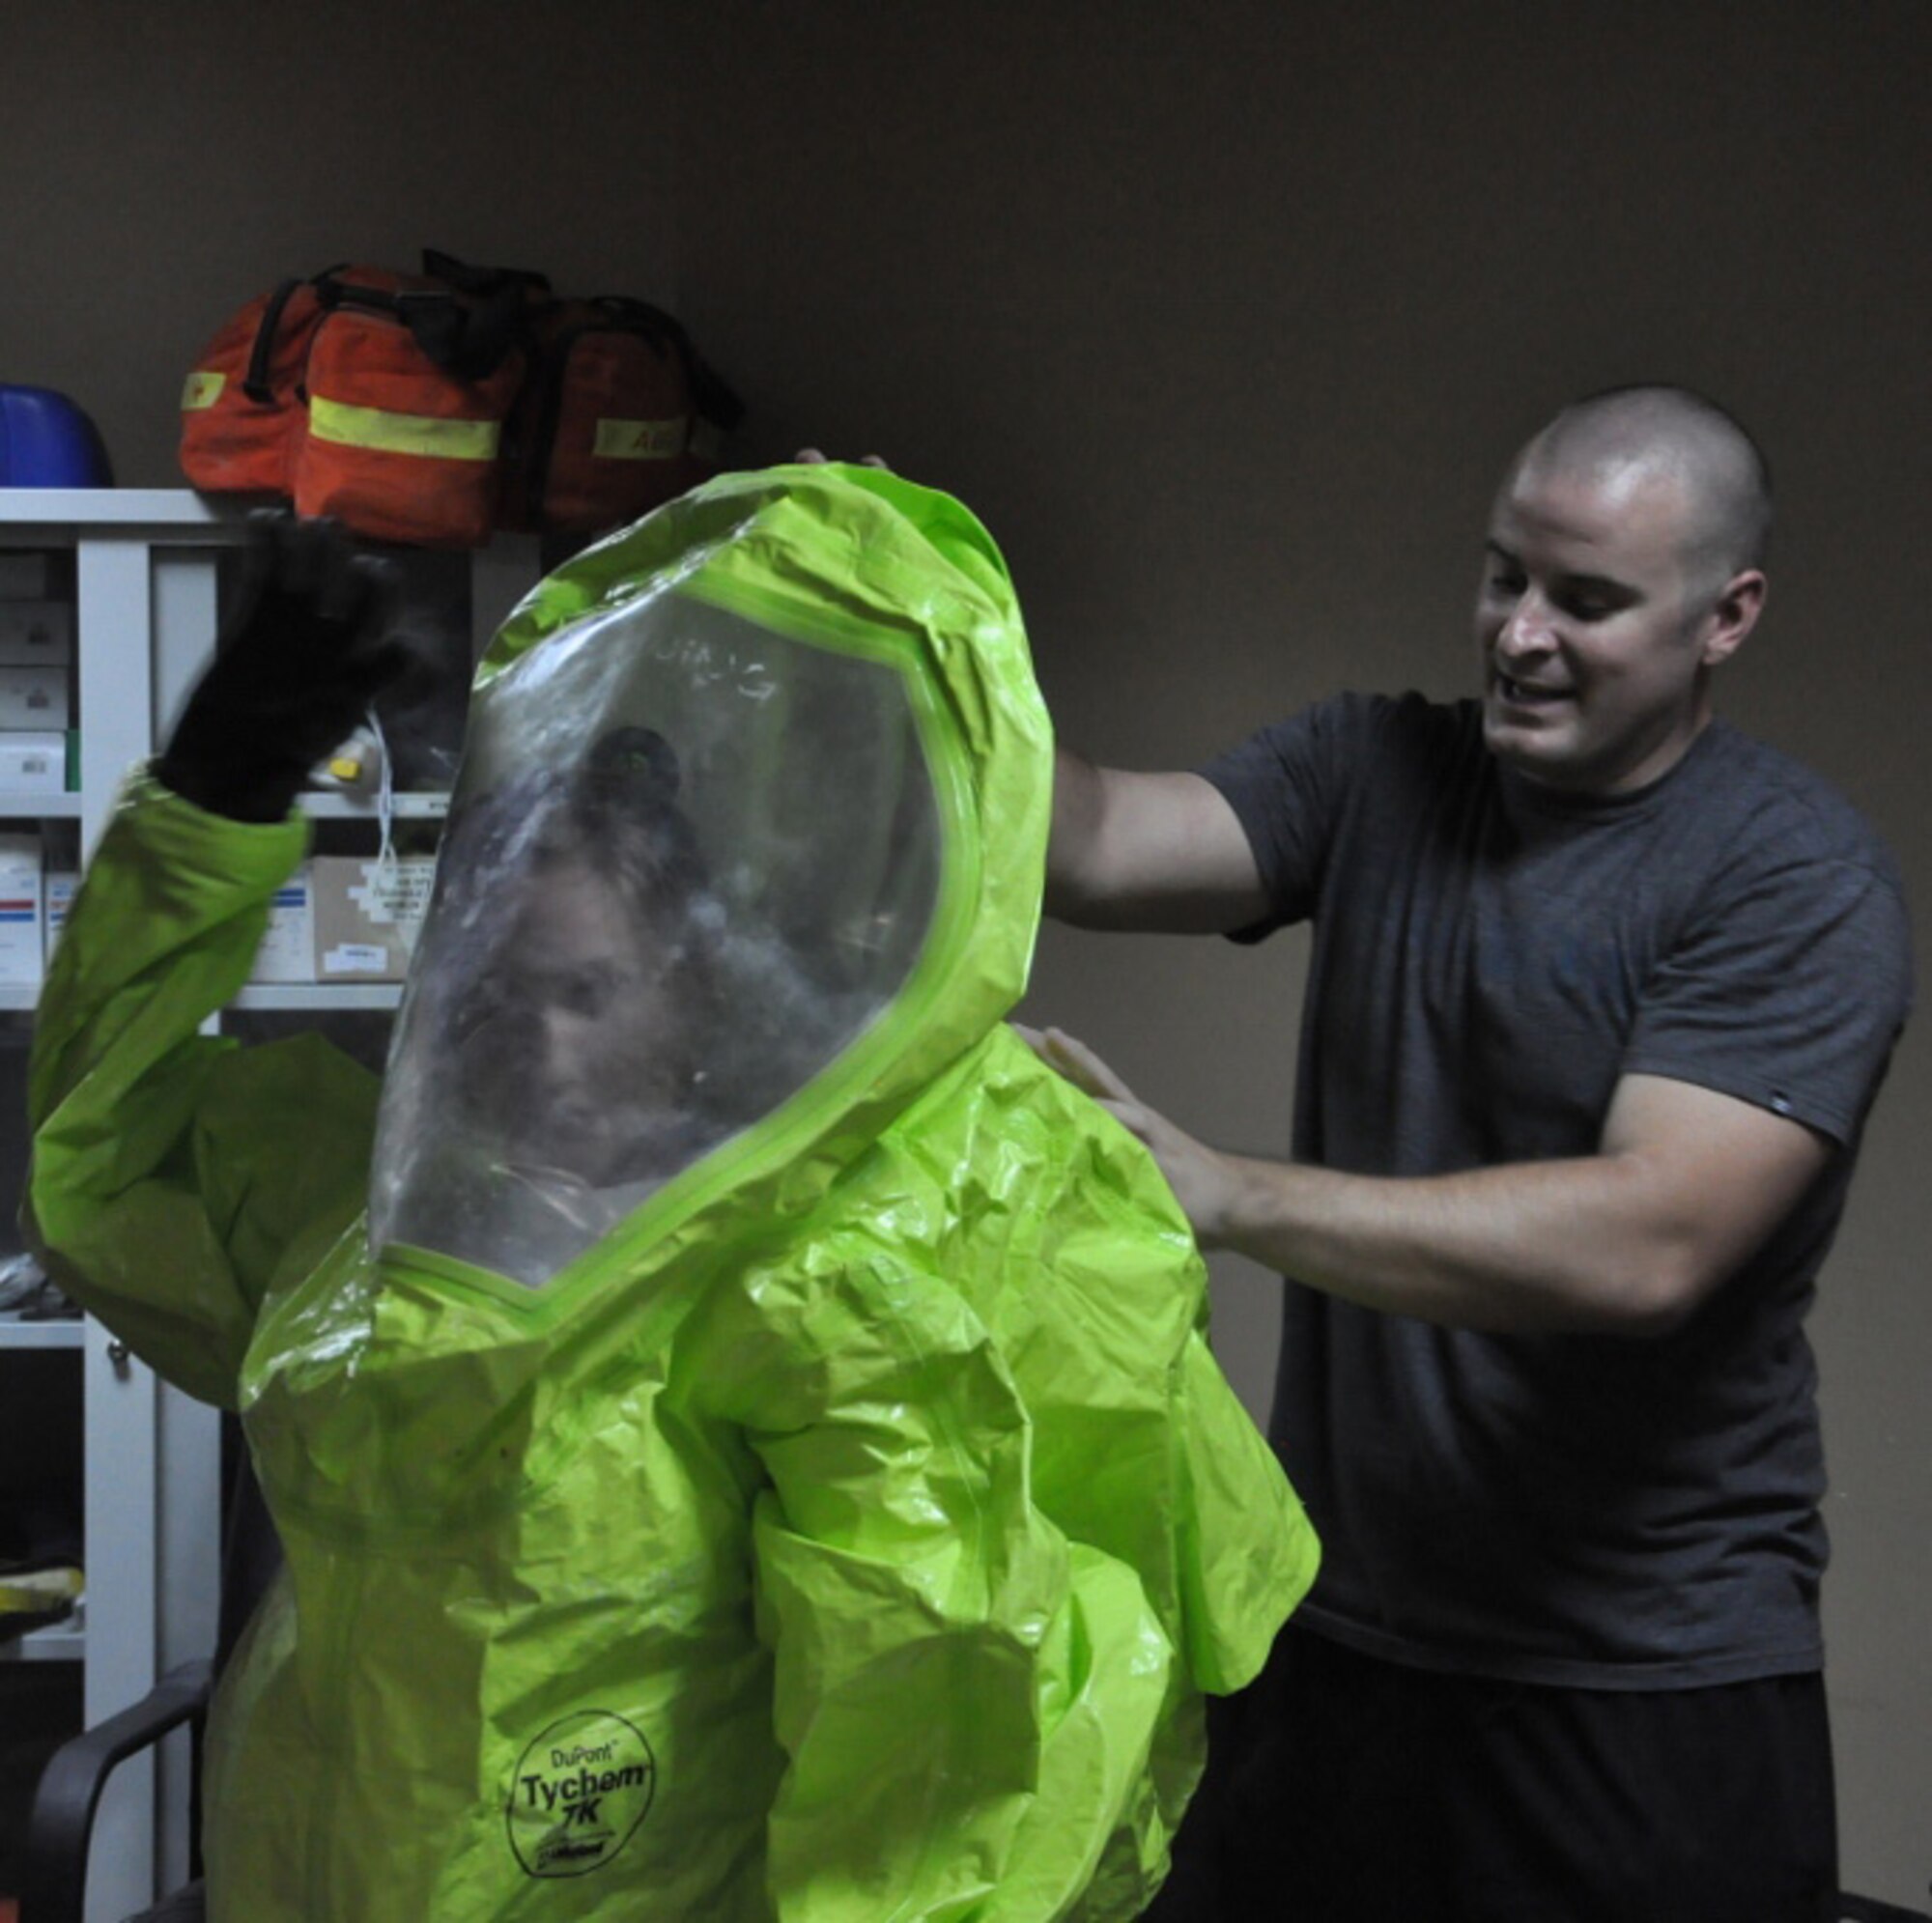 Staff Sgt. Kenneth Mize, 386th Expeditionary Civil Engineer Squadron, assists U.S. Army Spc. Nicole Sullivan, Pennsylvania National Guard, in donning a Level-A protective suit during hazardous material training at an undisclosed location, Southwest Asia, June 4, 2013.  Between May and June 2013, in an effort between the 386th ECES and the Charlie Company, 55th Brigade Special Troops Battalion, more than 60 Soldiers received HAZMAT training, potentially saving the government thousands of dollars.  (U.S. Army photo by Staff Sgt. Shawn Barger)   